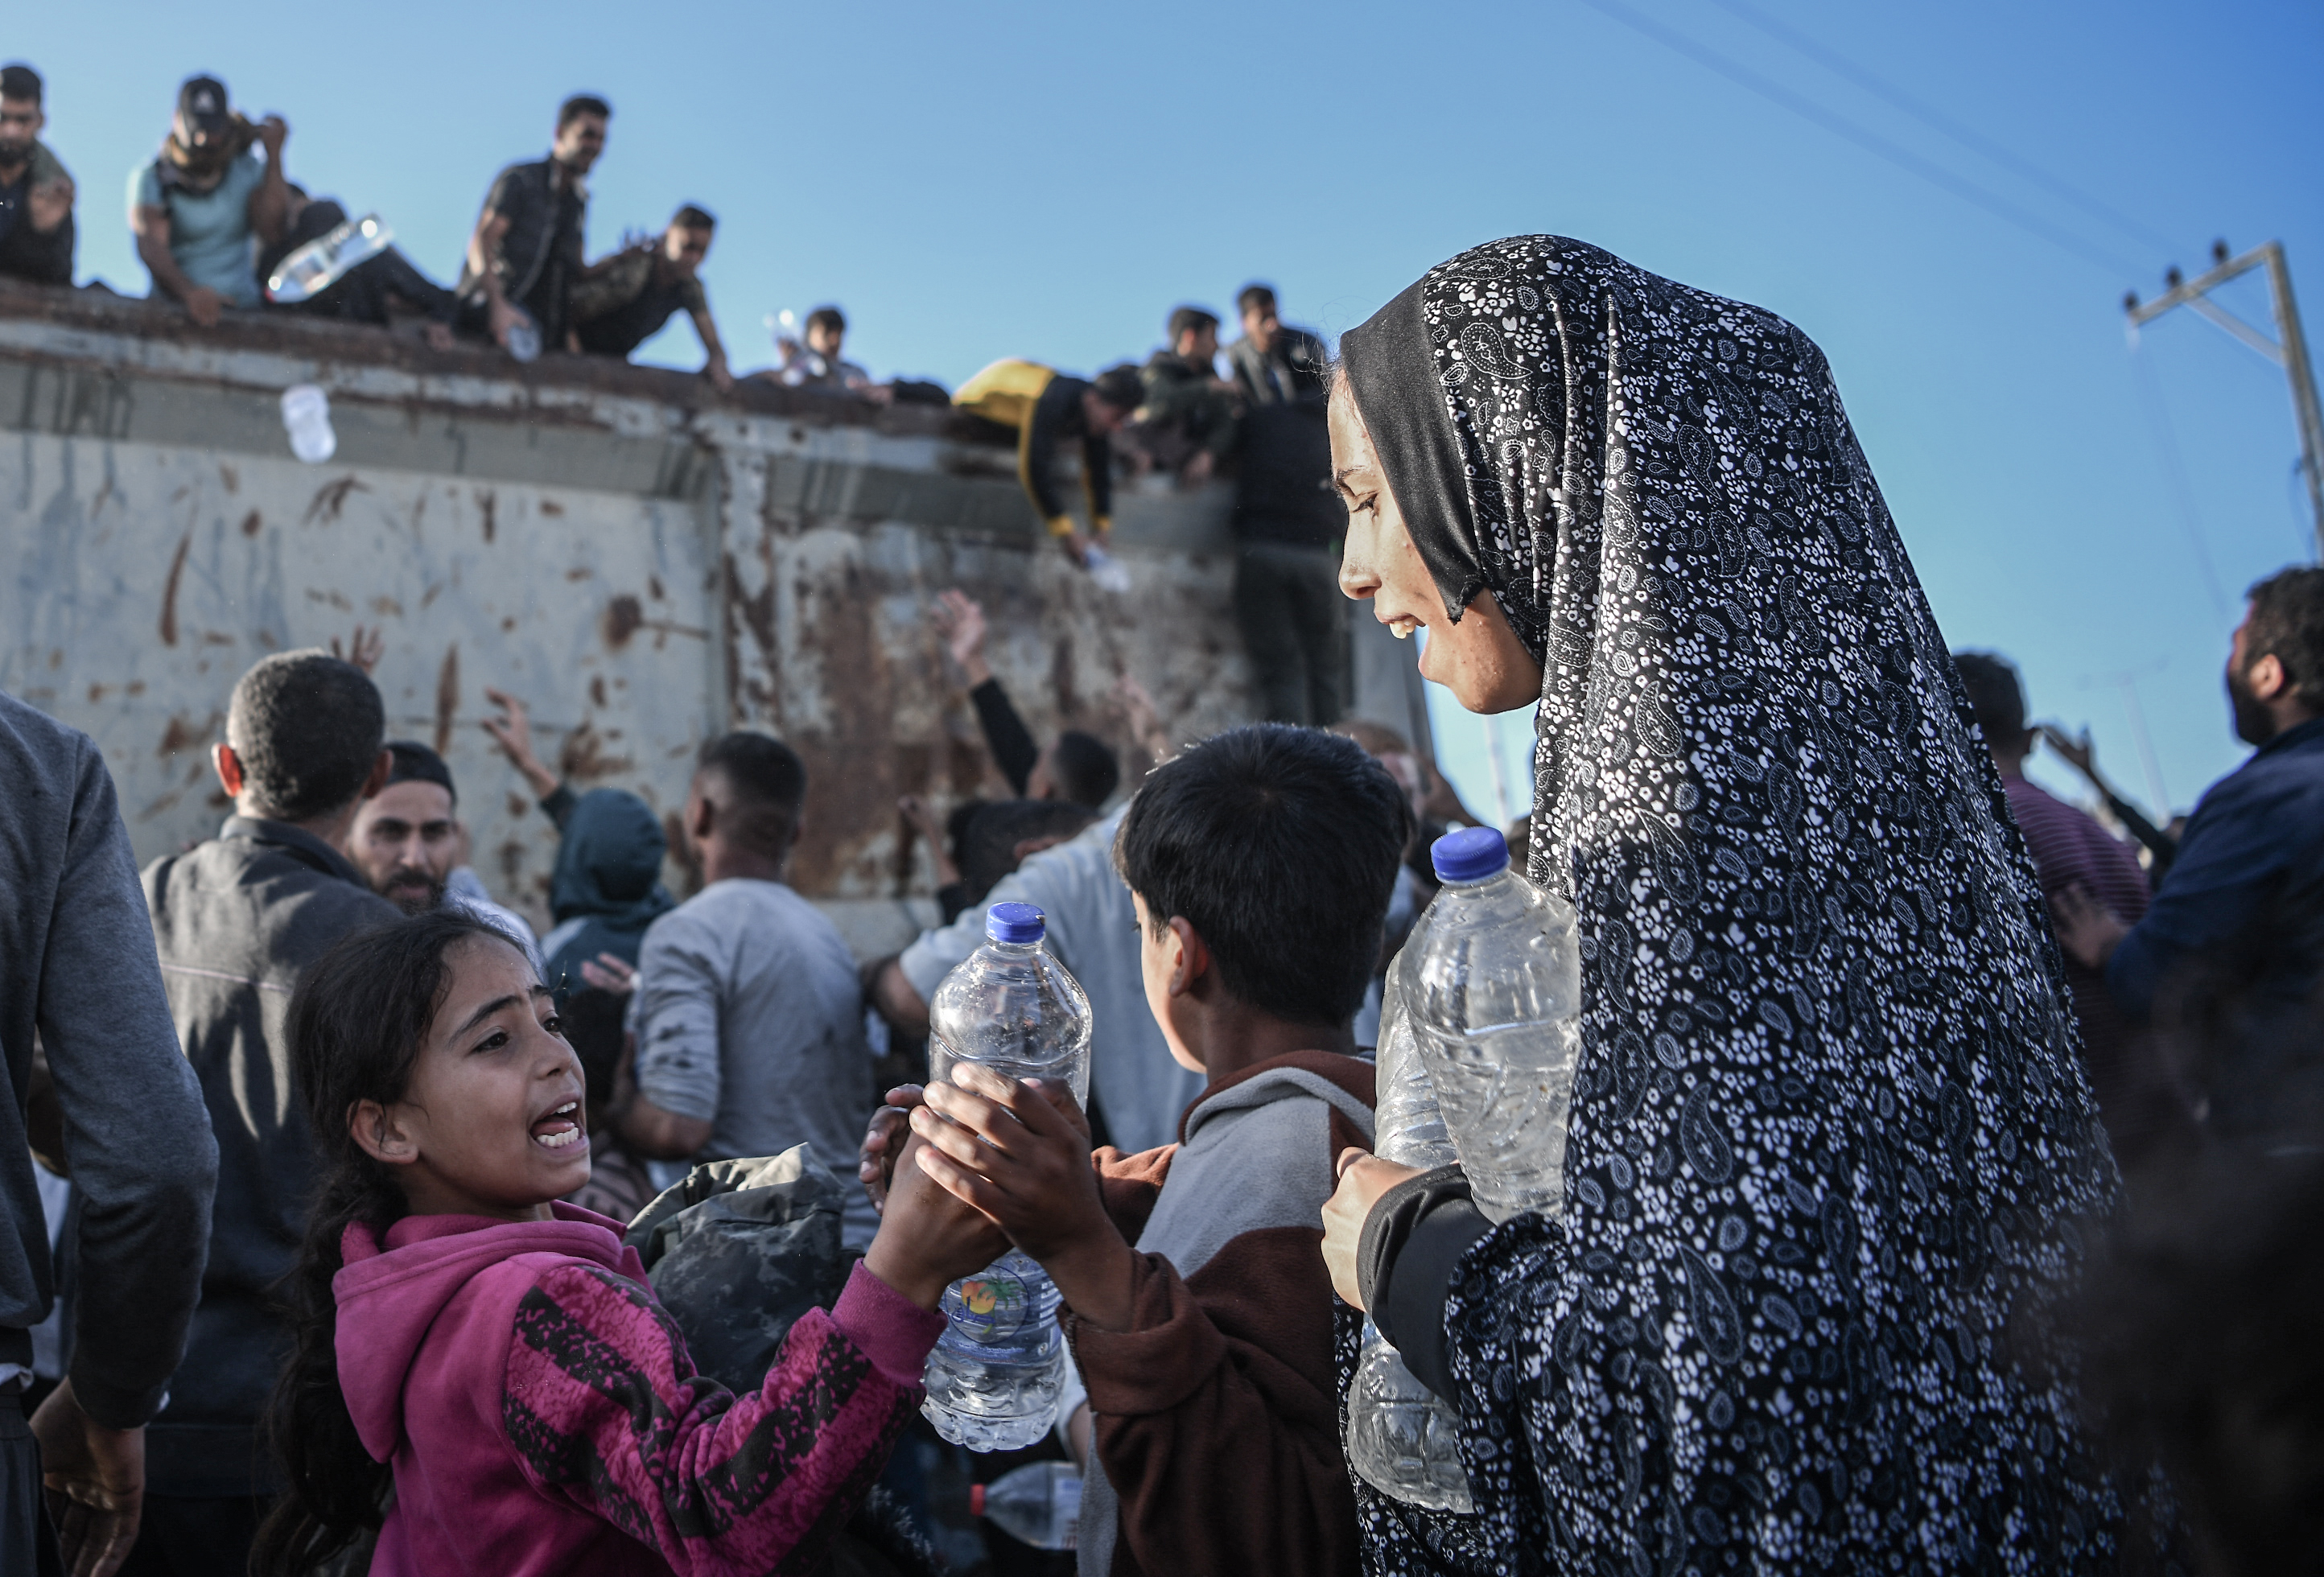 Palestinians flock to the truck carrying drinkable water as they face the threat of hunger and thirst in Rafah, Gaza on December 11